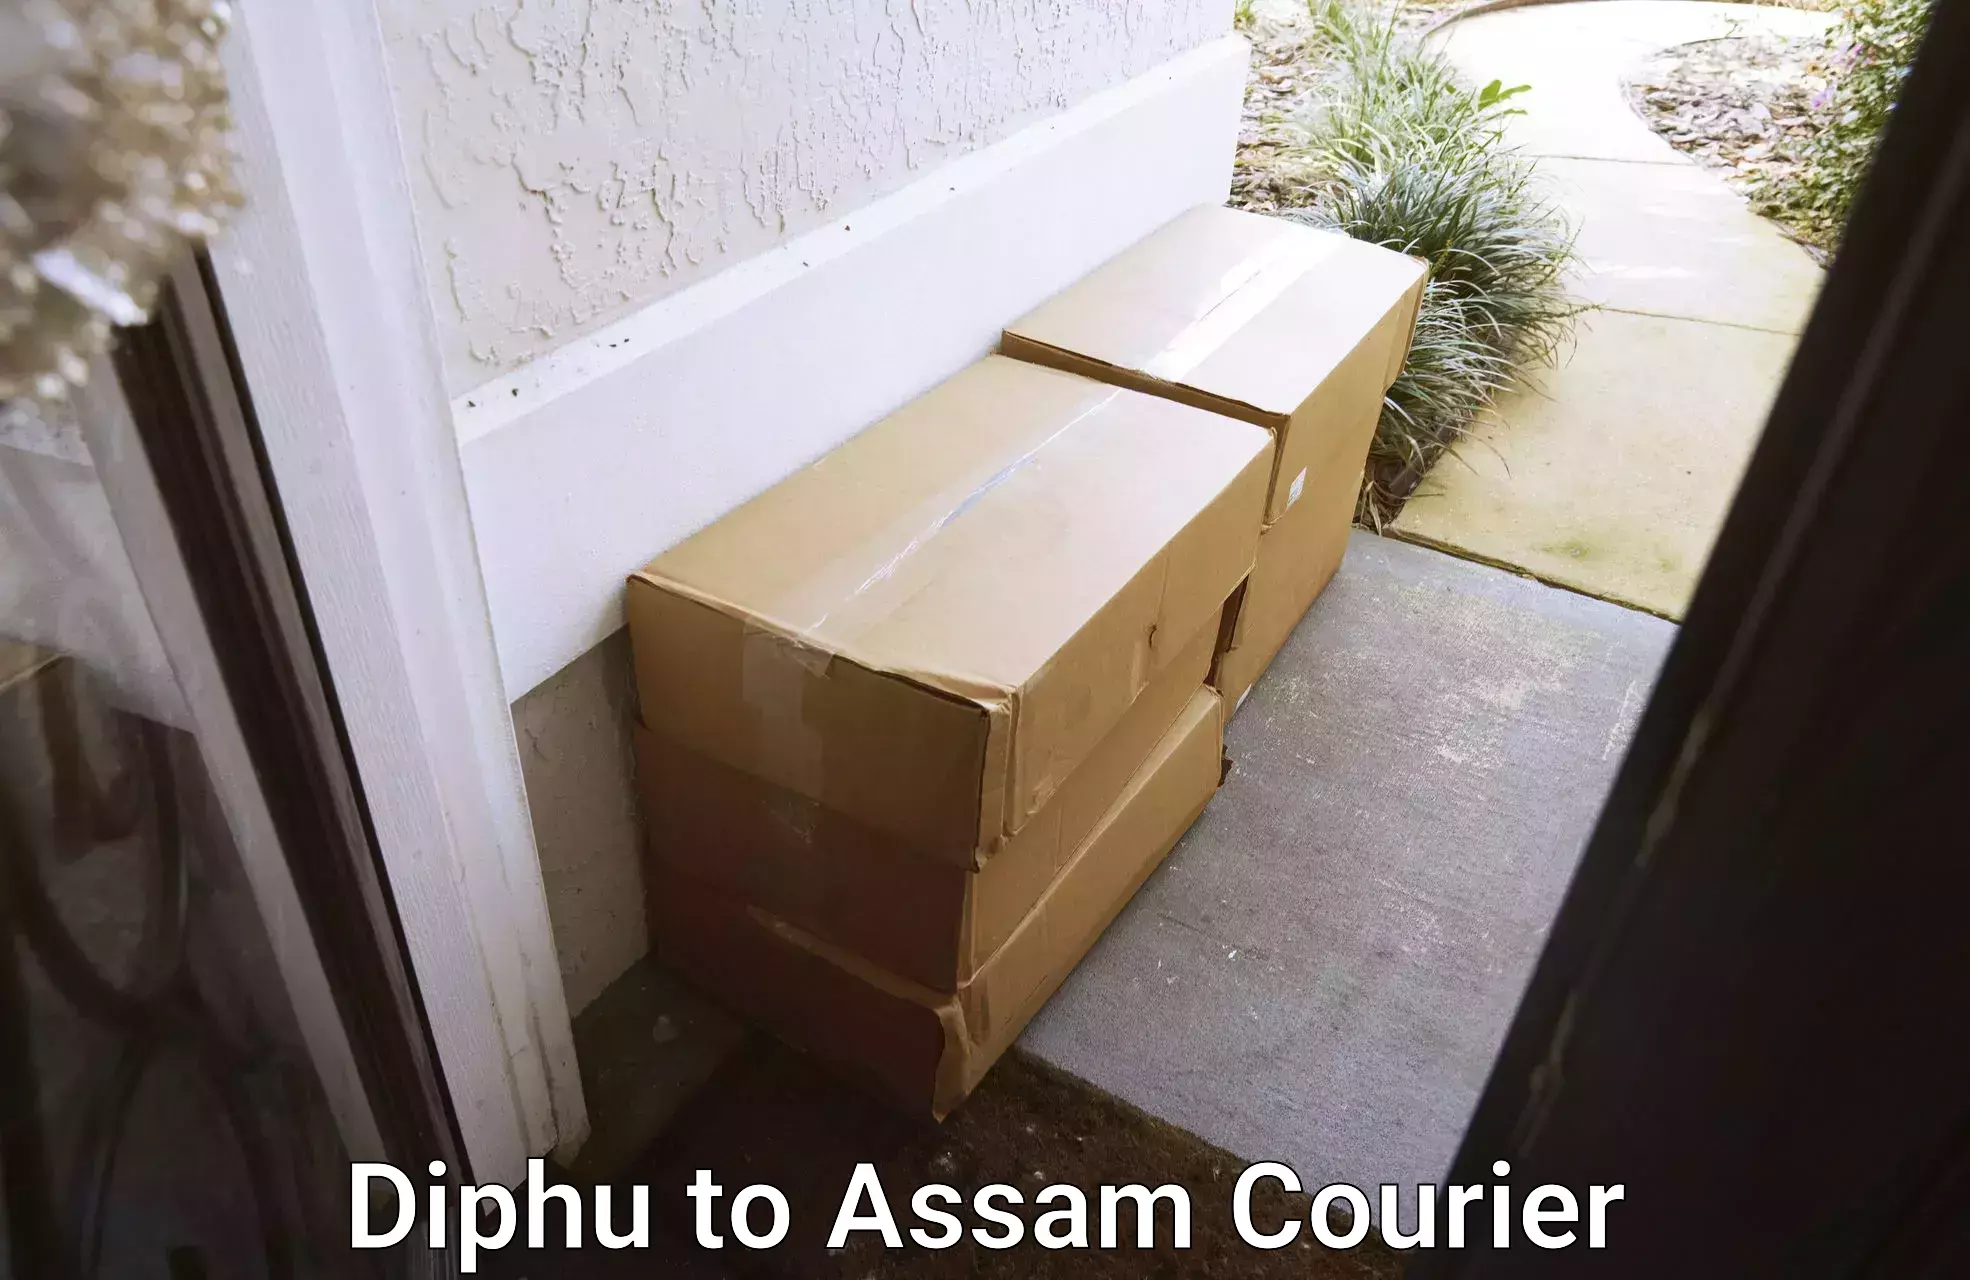 24-hour courier service in Diphu to Majuli